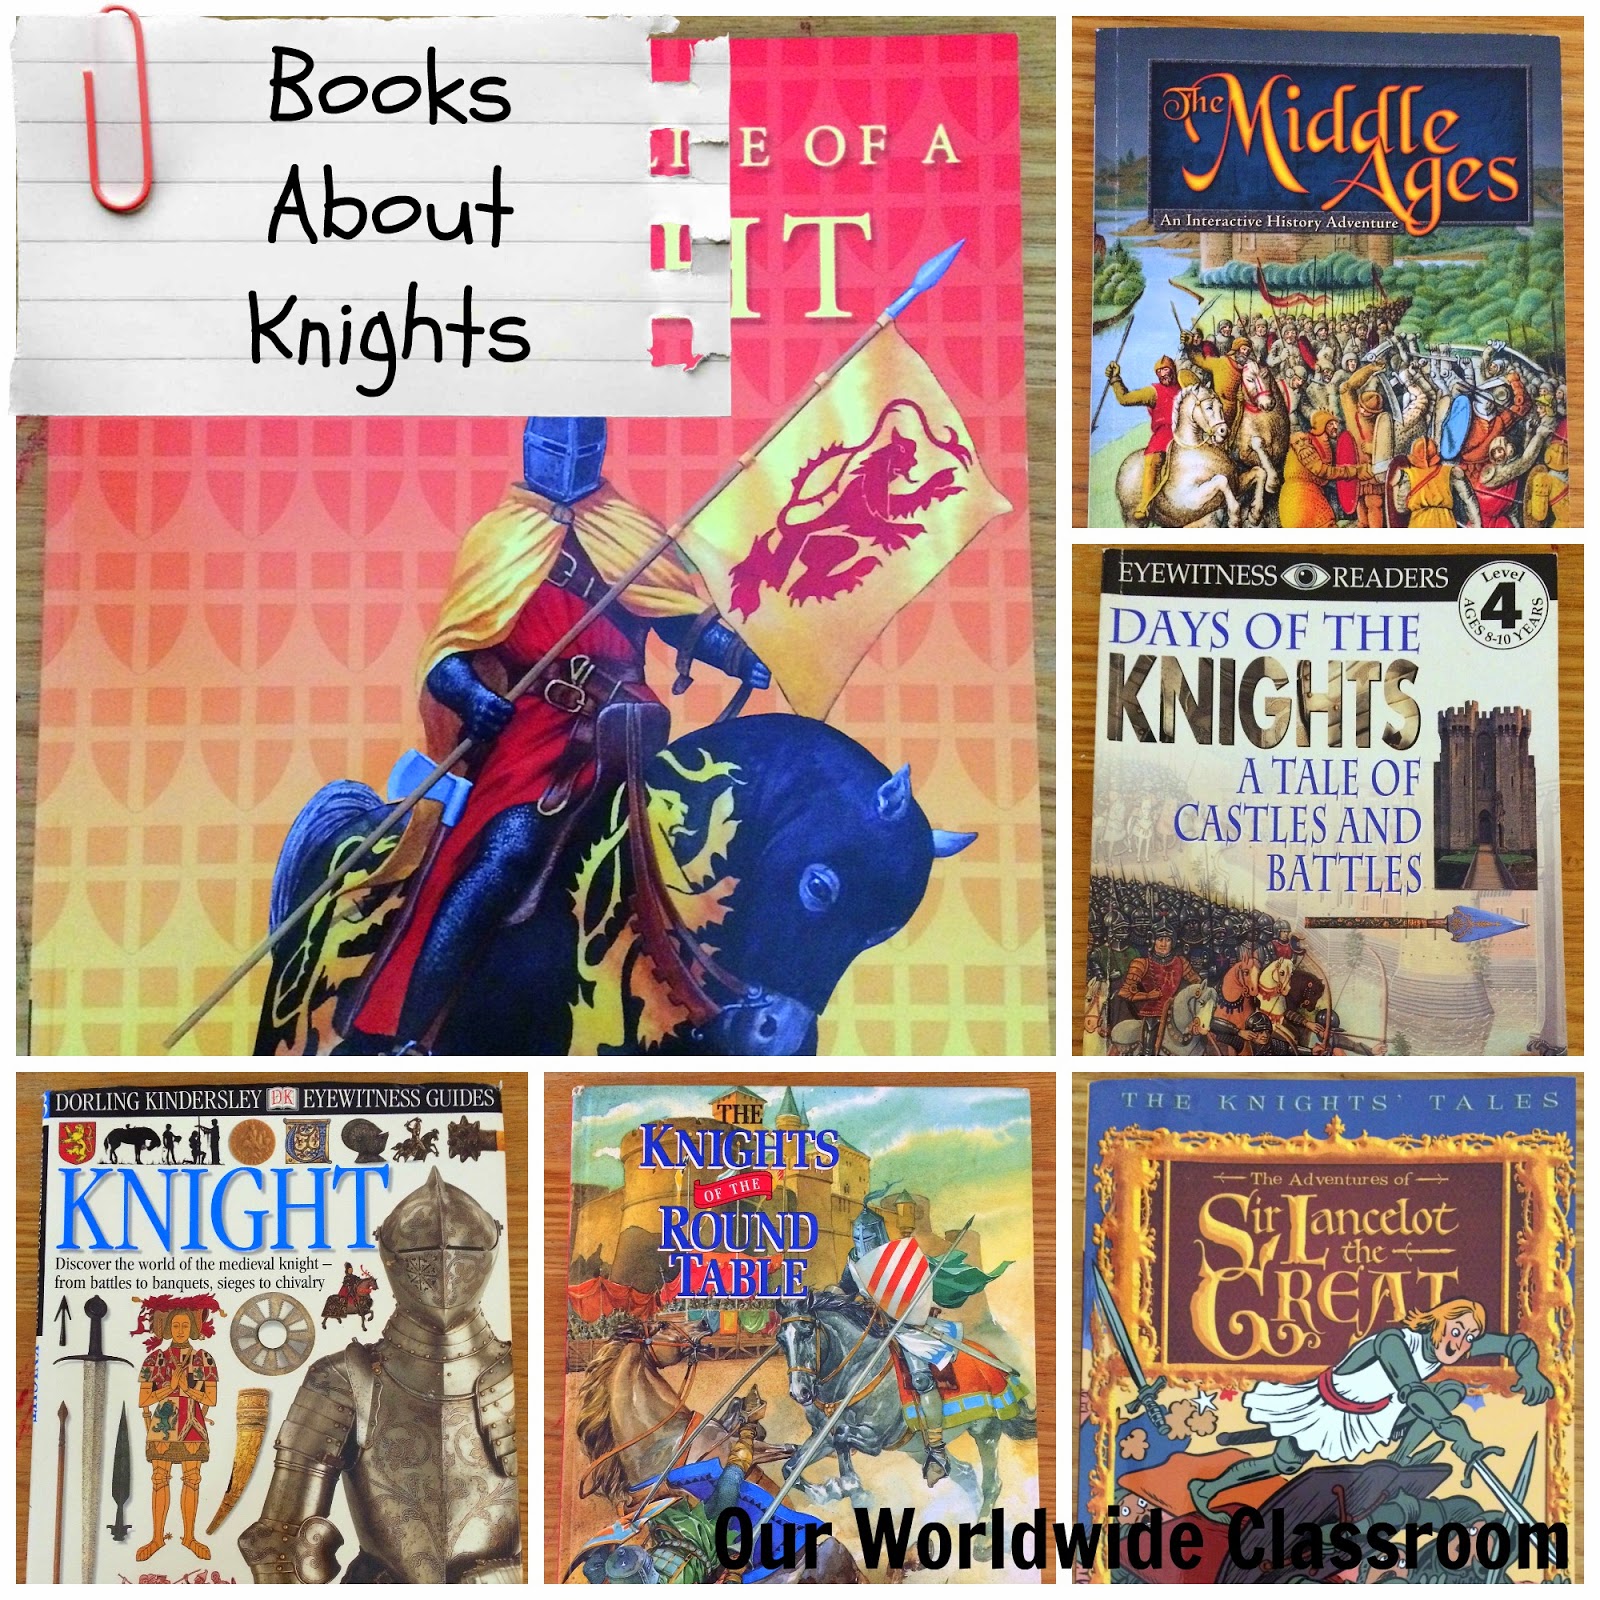 Kids Books About Knights and the Middle Ages